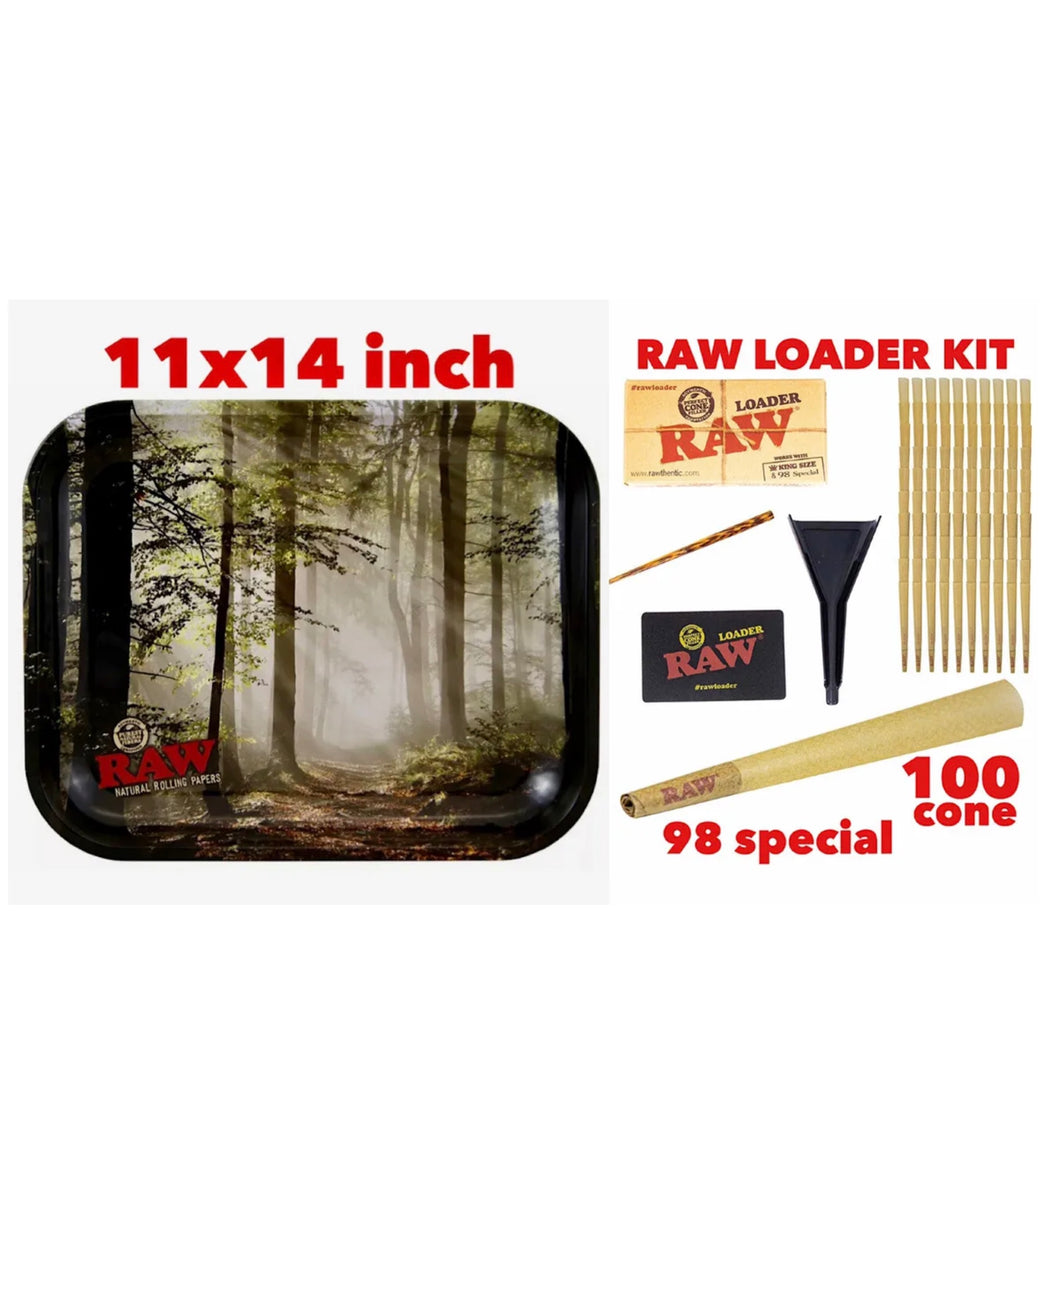 raw rolling metal tray(FOREST)large+raw 98 special size cone(100 pack)+cone loader kit